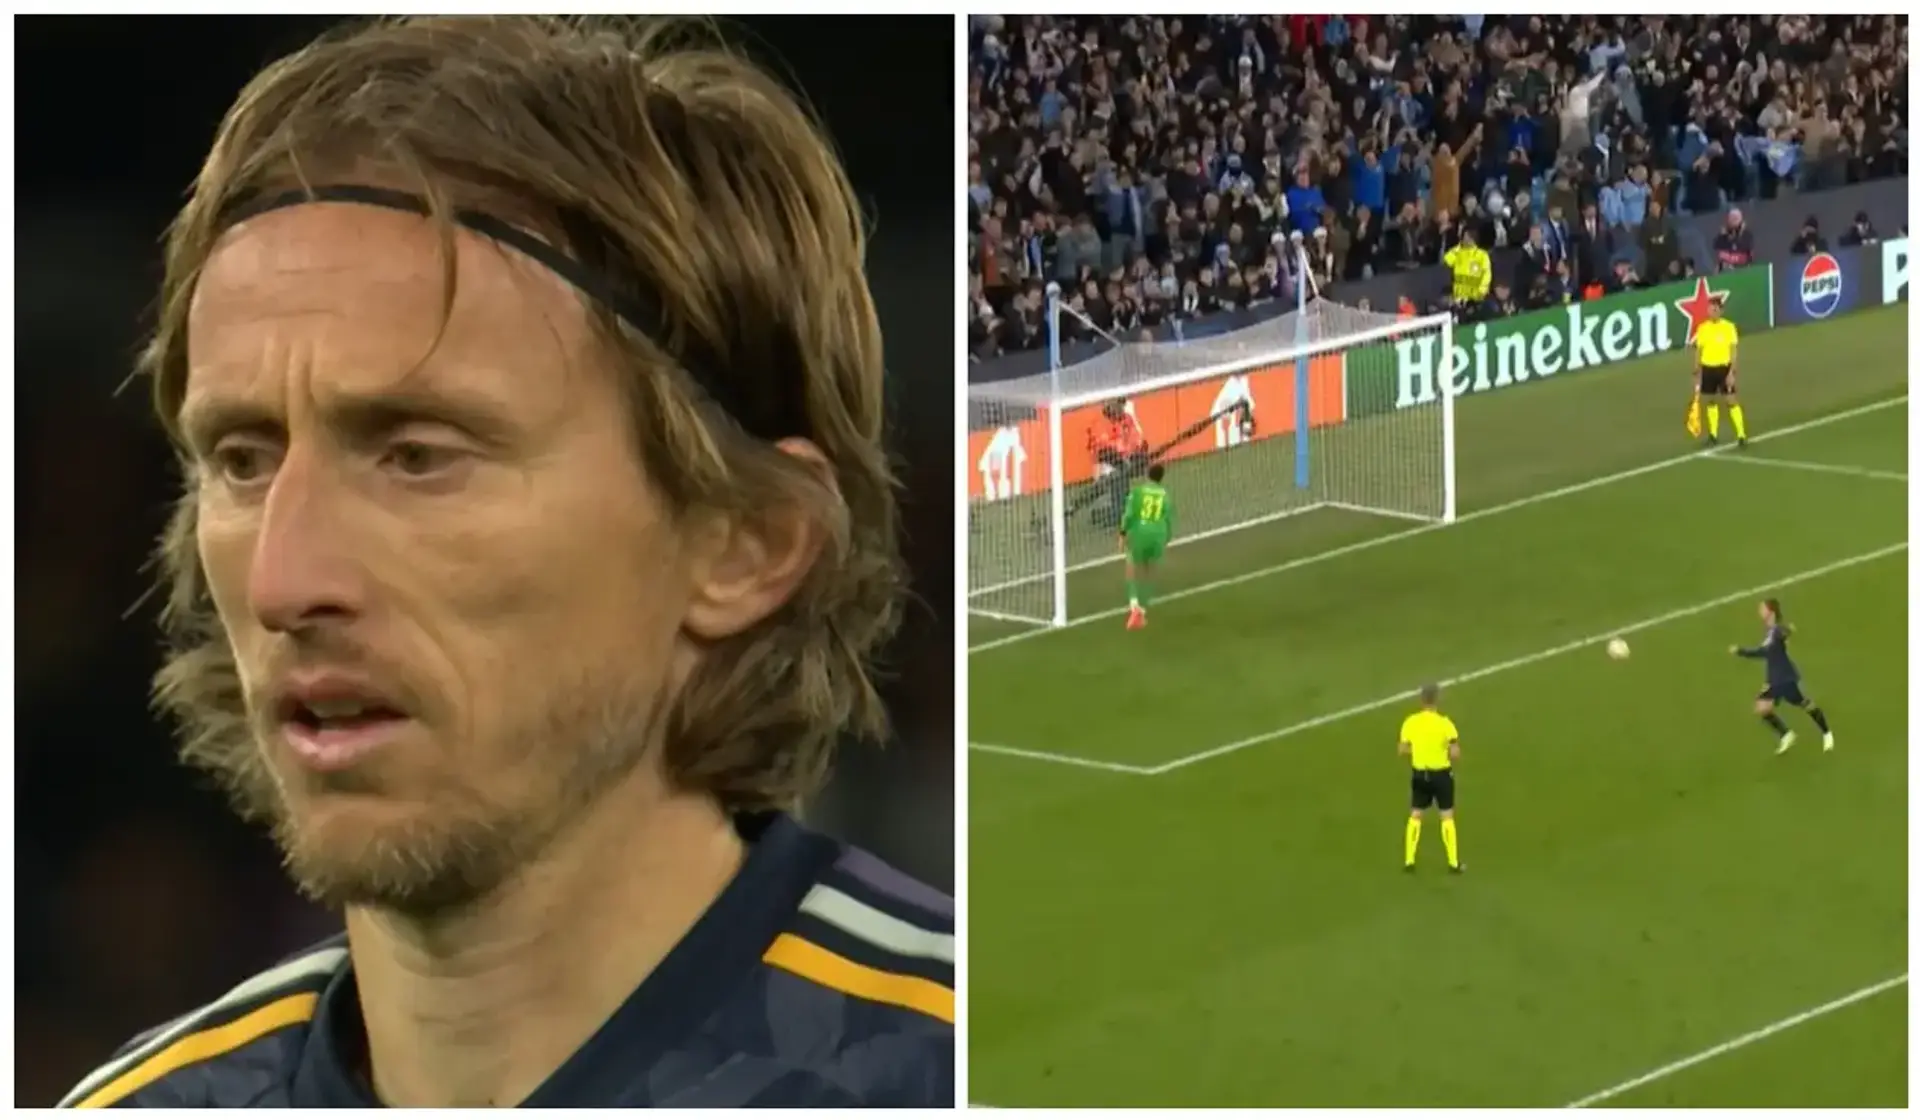 Fans noticed Modric's genius decision after the missed penalty — it helped Real Madrid win the shootout